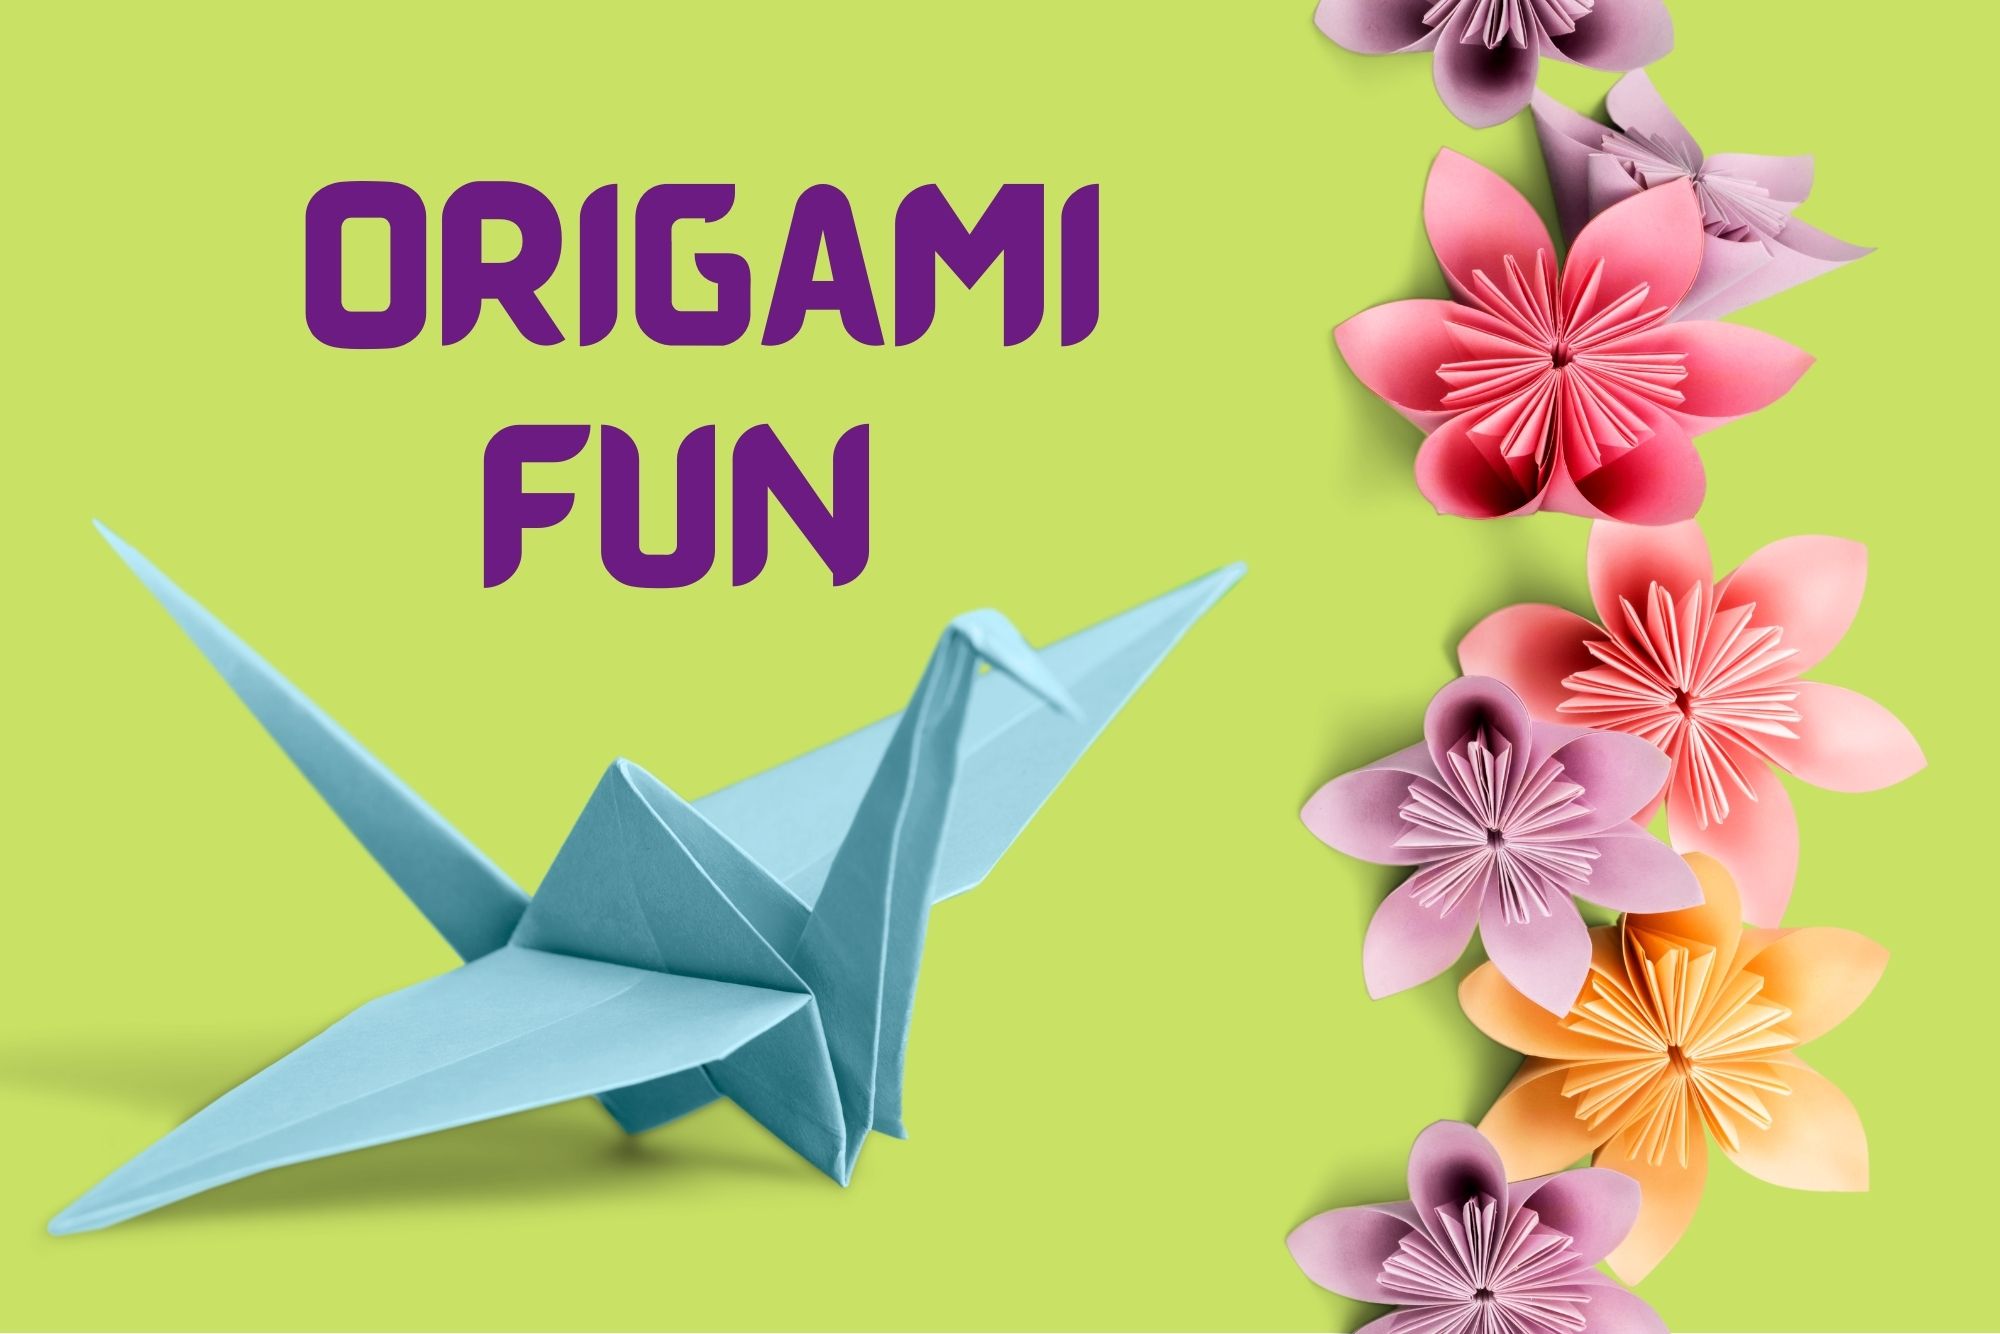 JAPANESE ORIGAMI FOR BEGINNERS: 20 Classic Origami Models 